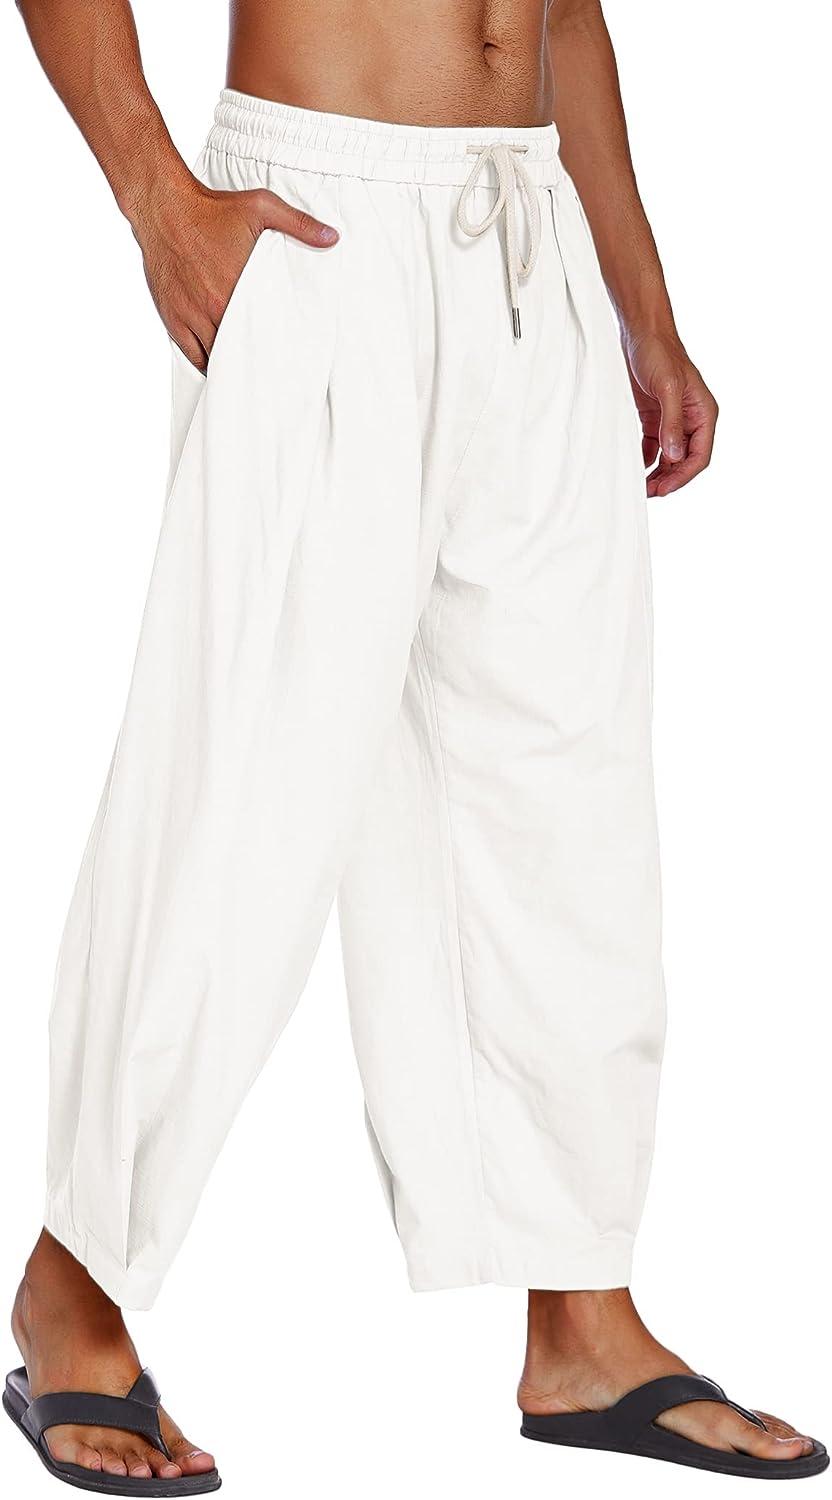 COOFANDY Men's Cotton Linen Harem Pants Drawstring Casual Cropped Trousers  Lightweight Loose Beach Yoga Pants with Pockets White X-Large